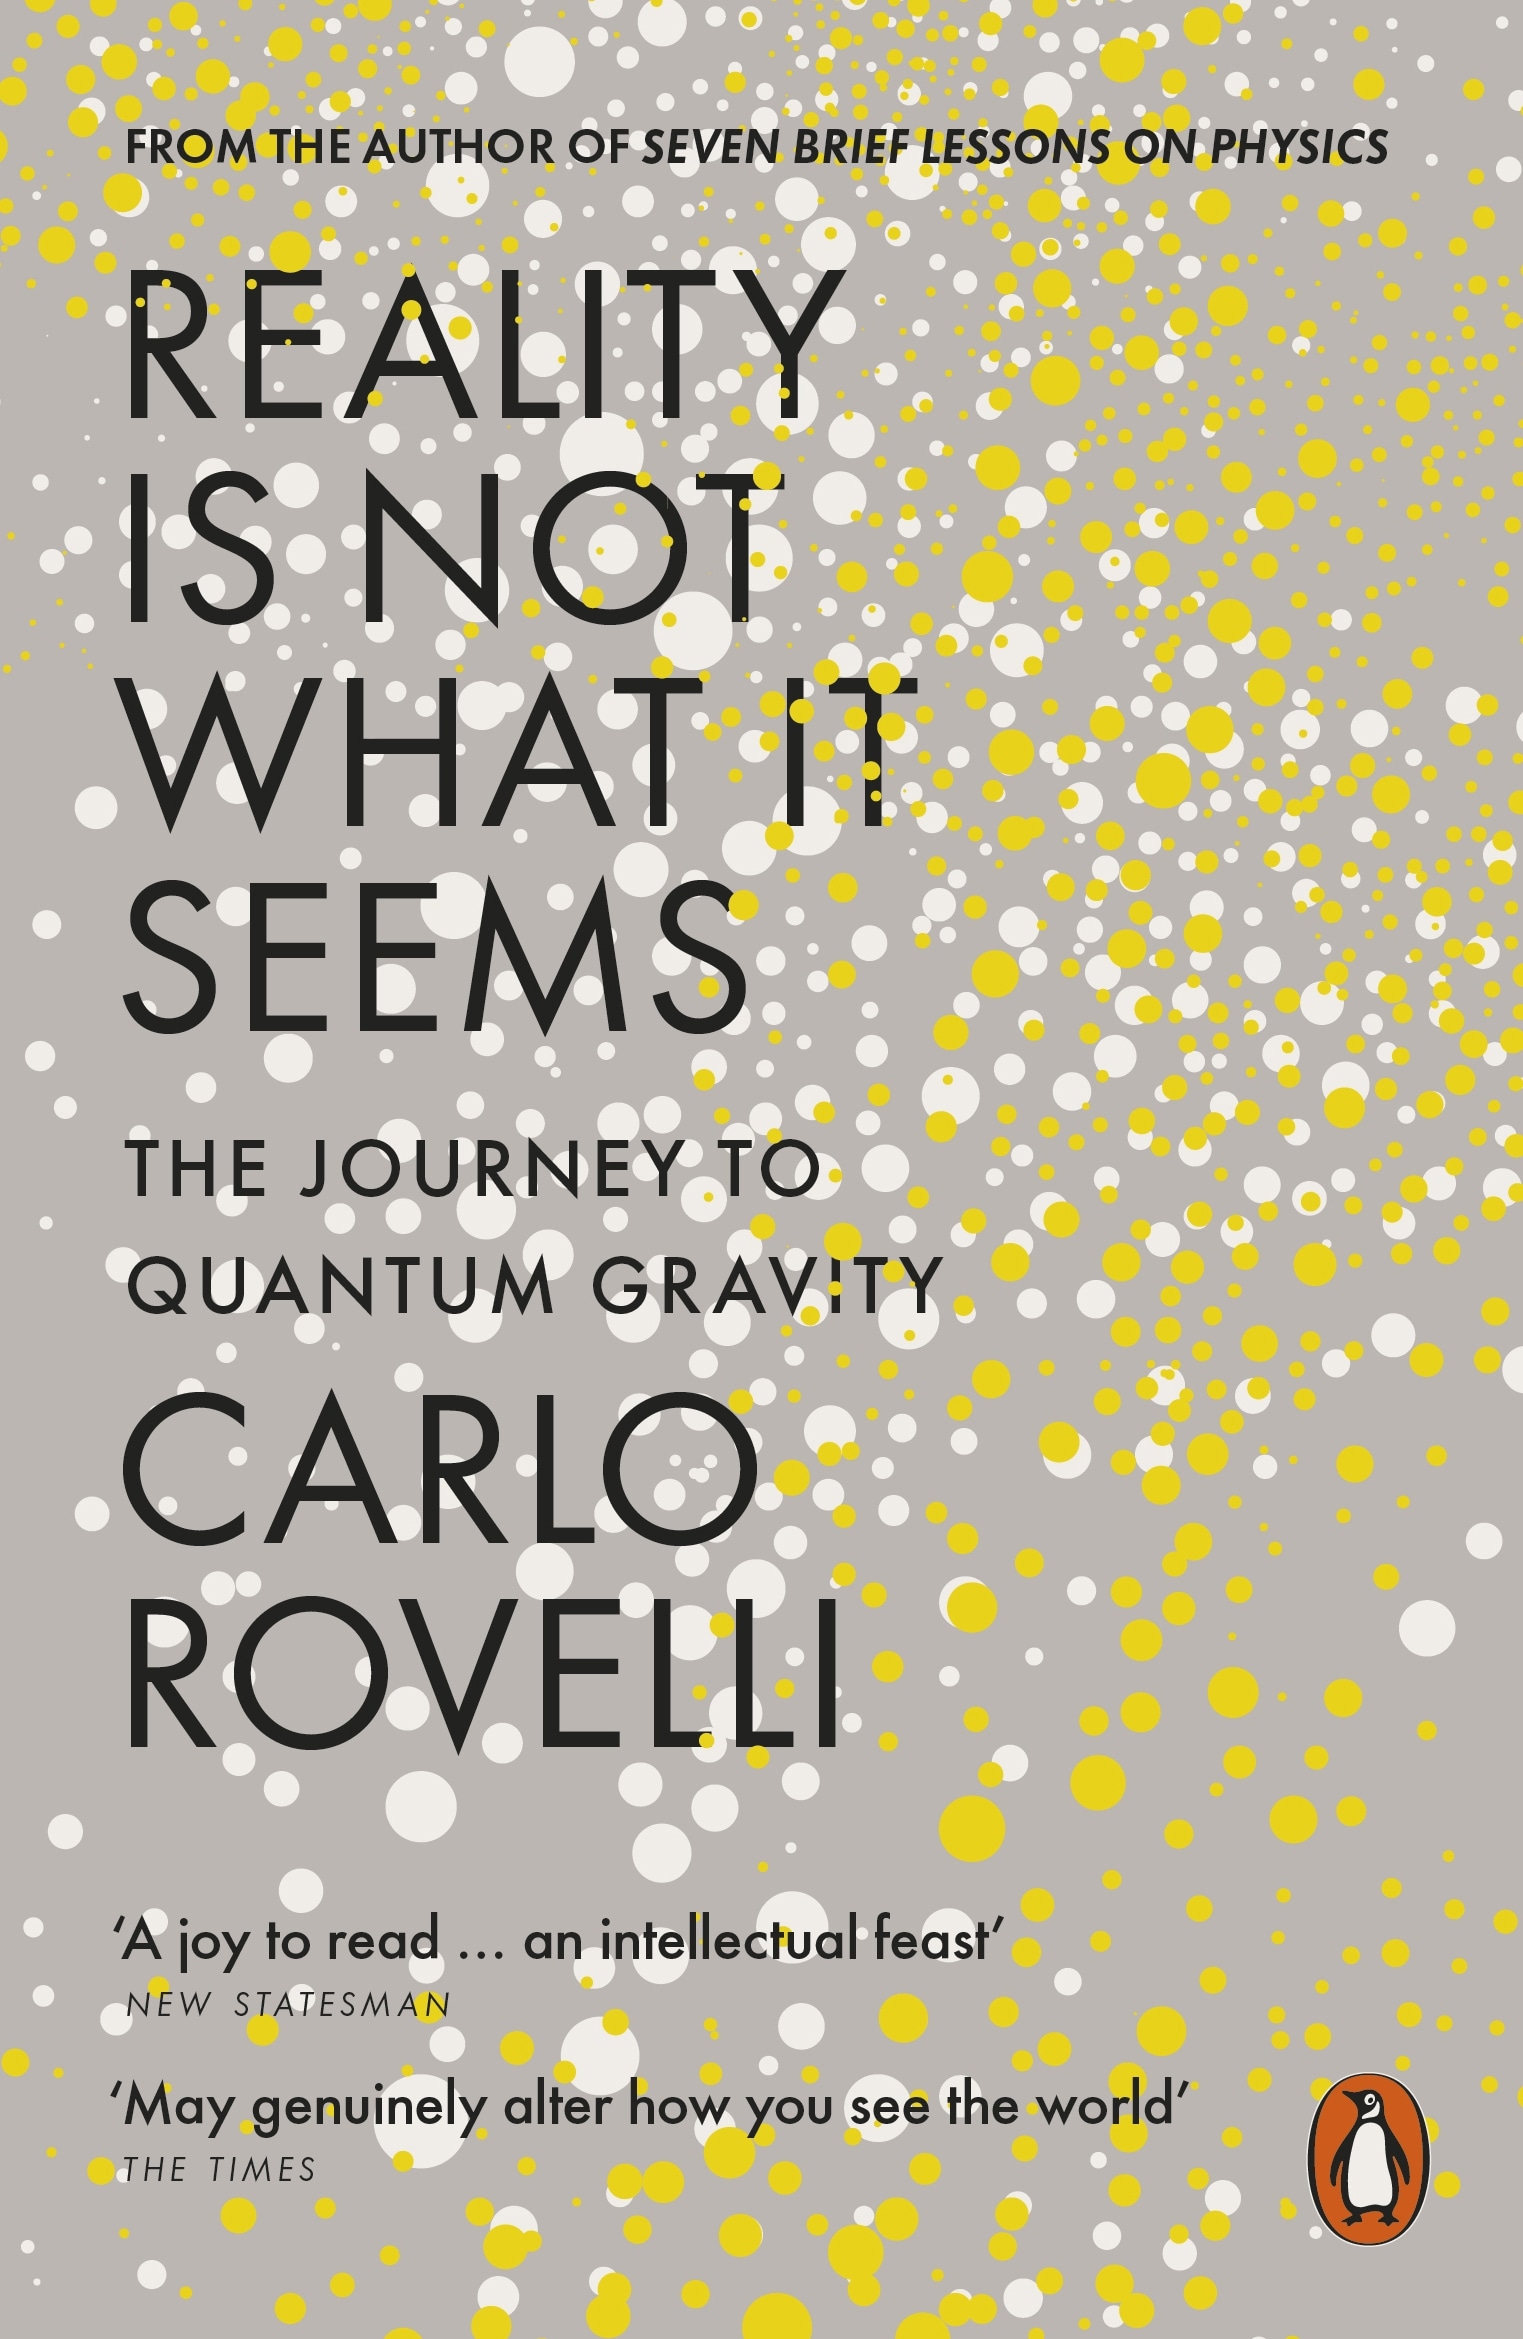 Book “Reality Is Not What It Seems” by Carlo Rovelli — June 1, 2017